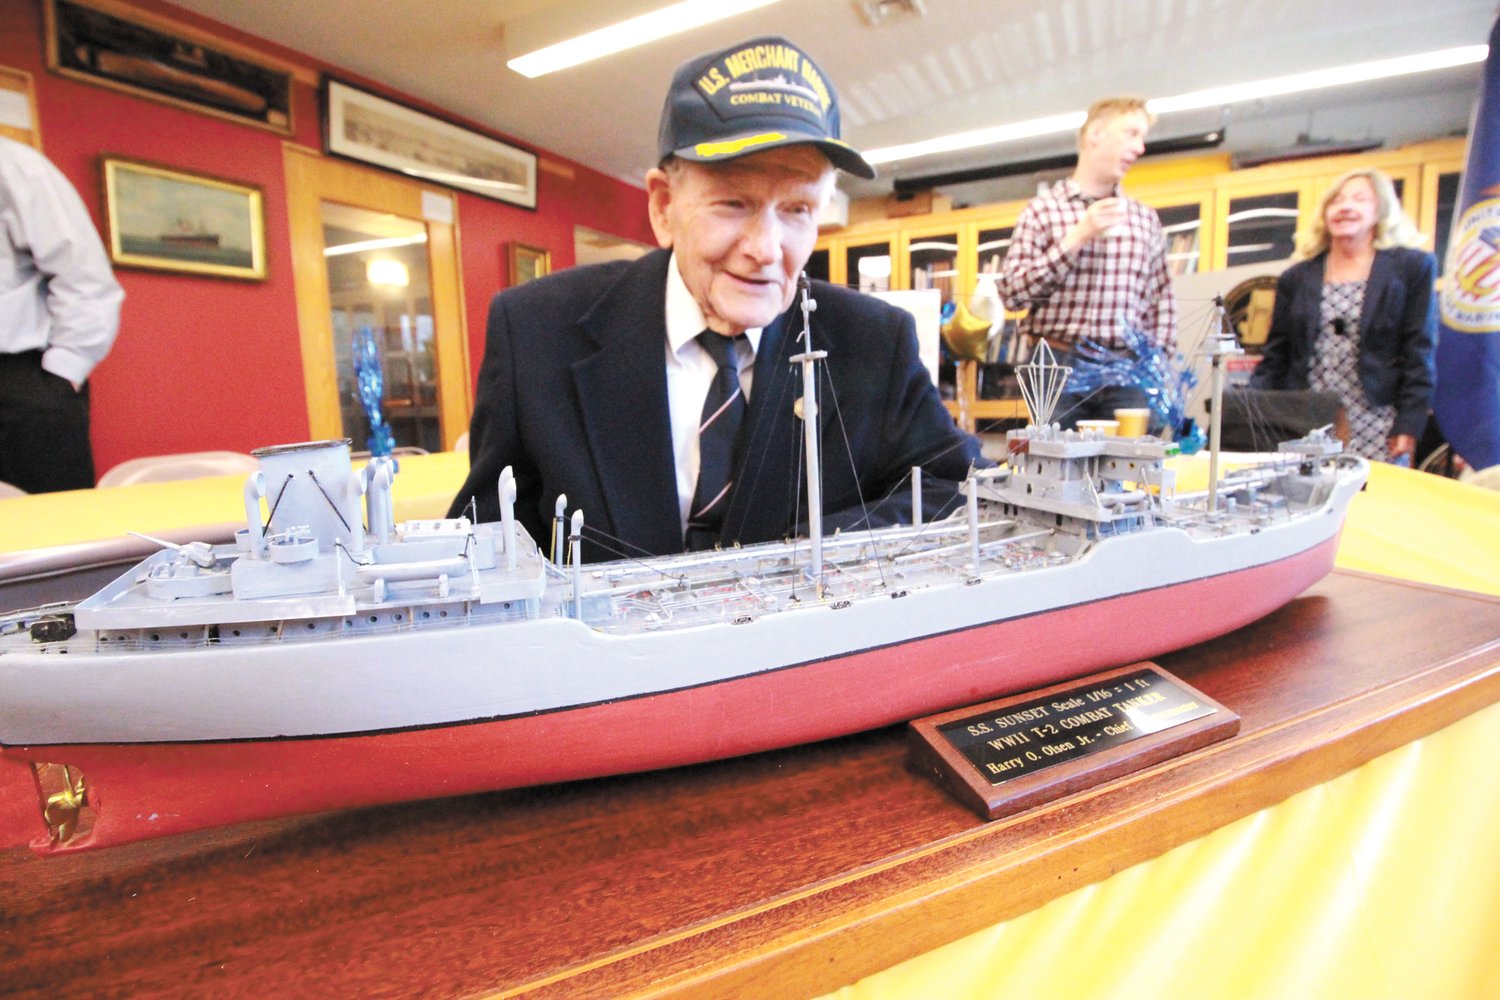 THE SHIP HE SAILED: Harry Olsen pictured with a model of the tanker he served on at the recent Steamship Historical Society of America reception held in recognition of him receiving a Congressional Gold Medal.